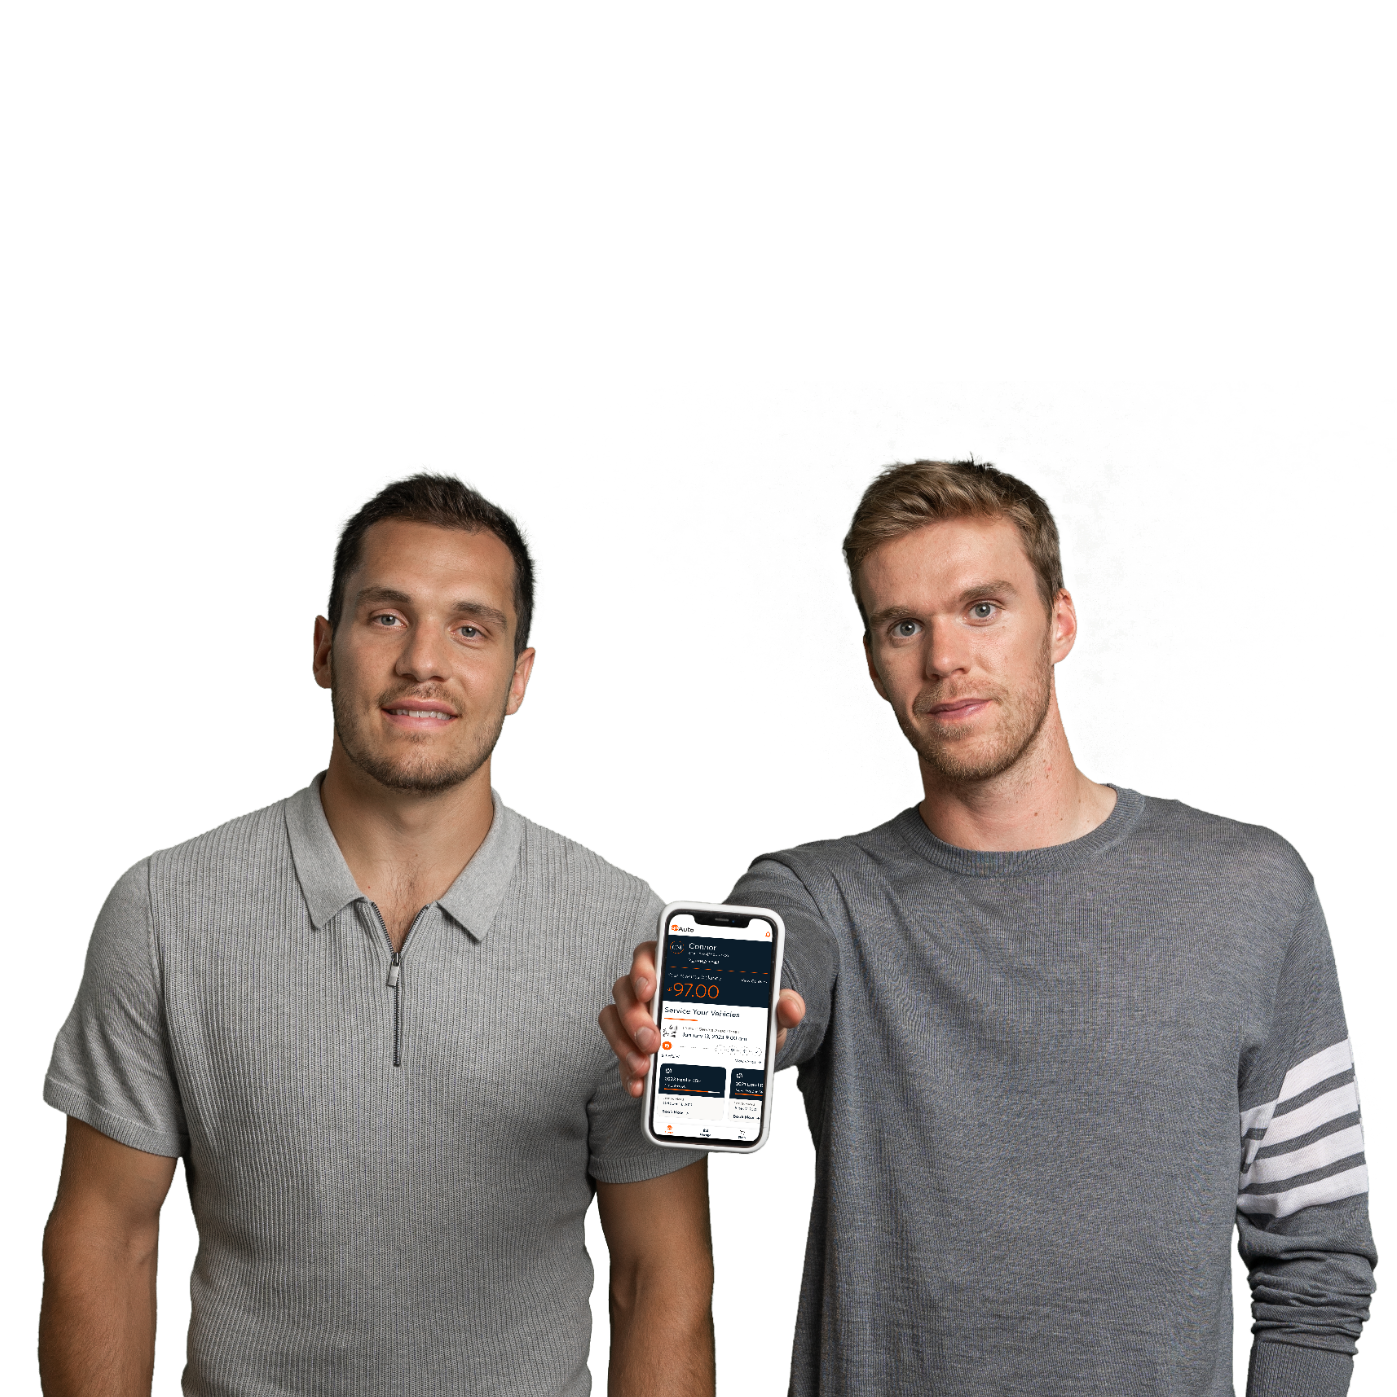 Connor McDavid and Bo Horvat are smiling and holding an iPhone, with the Go Auto app displaying on the screen